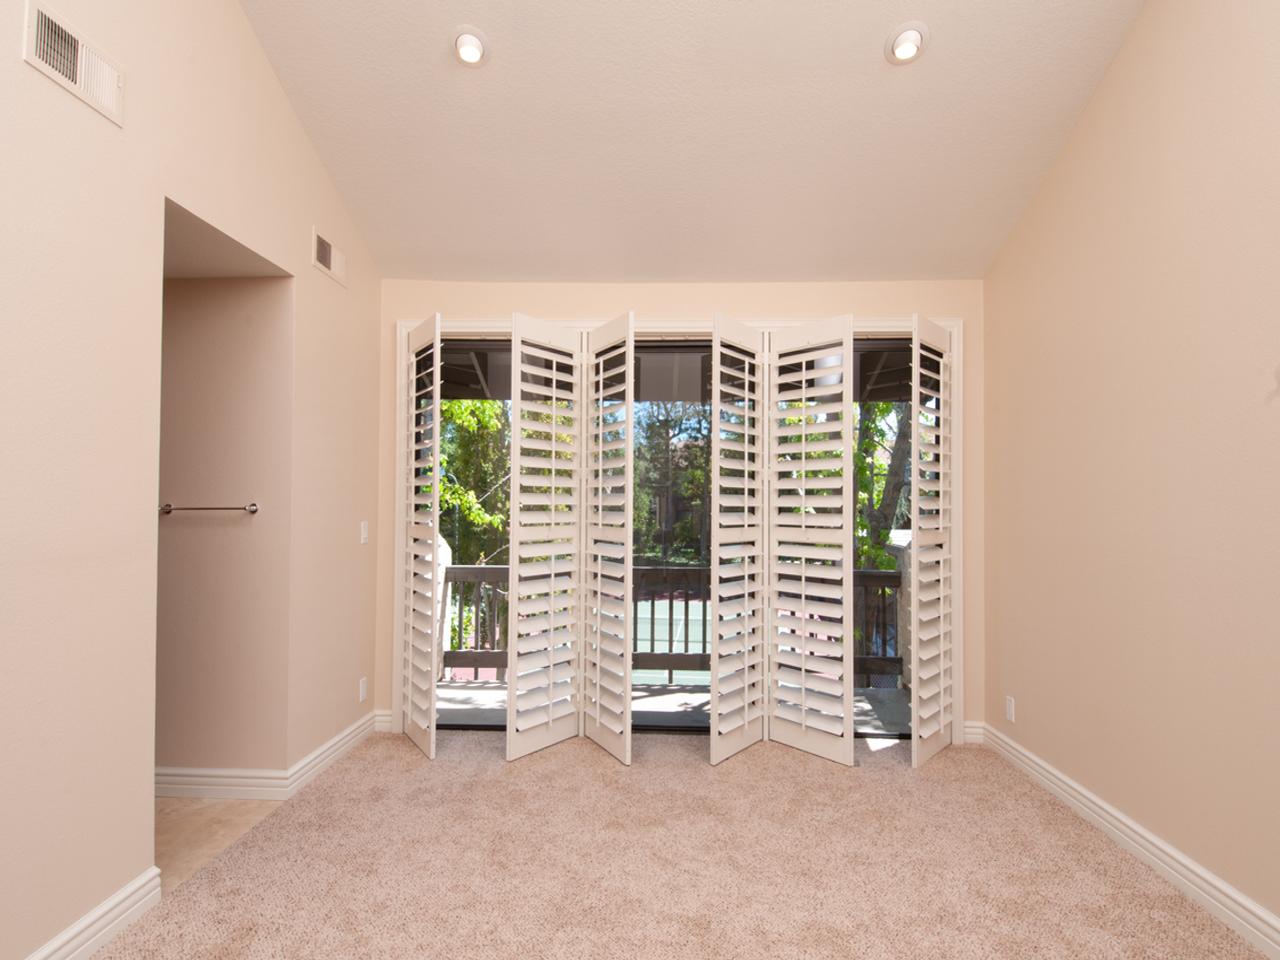 Sliding glass doors with plantation shutters opened